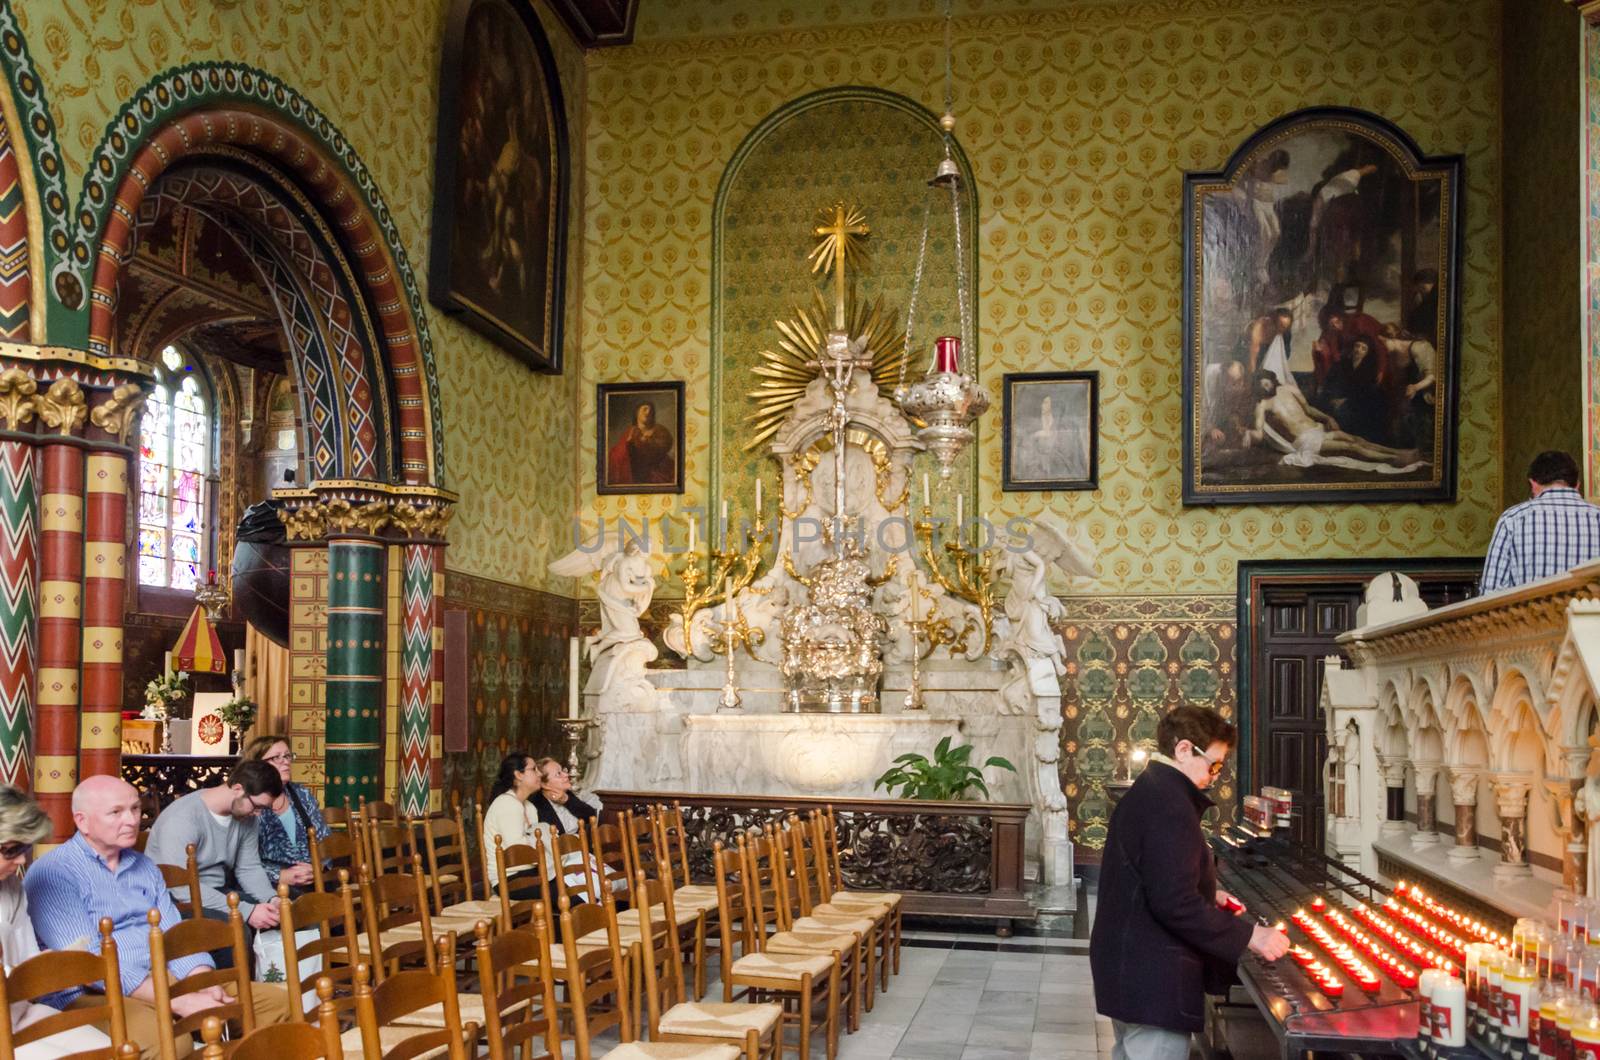 Bruges, Belgium - May 11, 2015: Tourists visit Interior of Basilica of the Holy Blood in Bruges, Belgium on May 11, 2015. Basilica is located in the Burg square and consists of a lower and upper chapel.